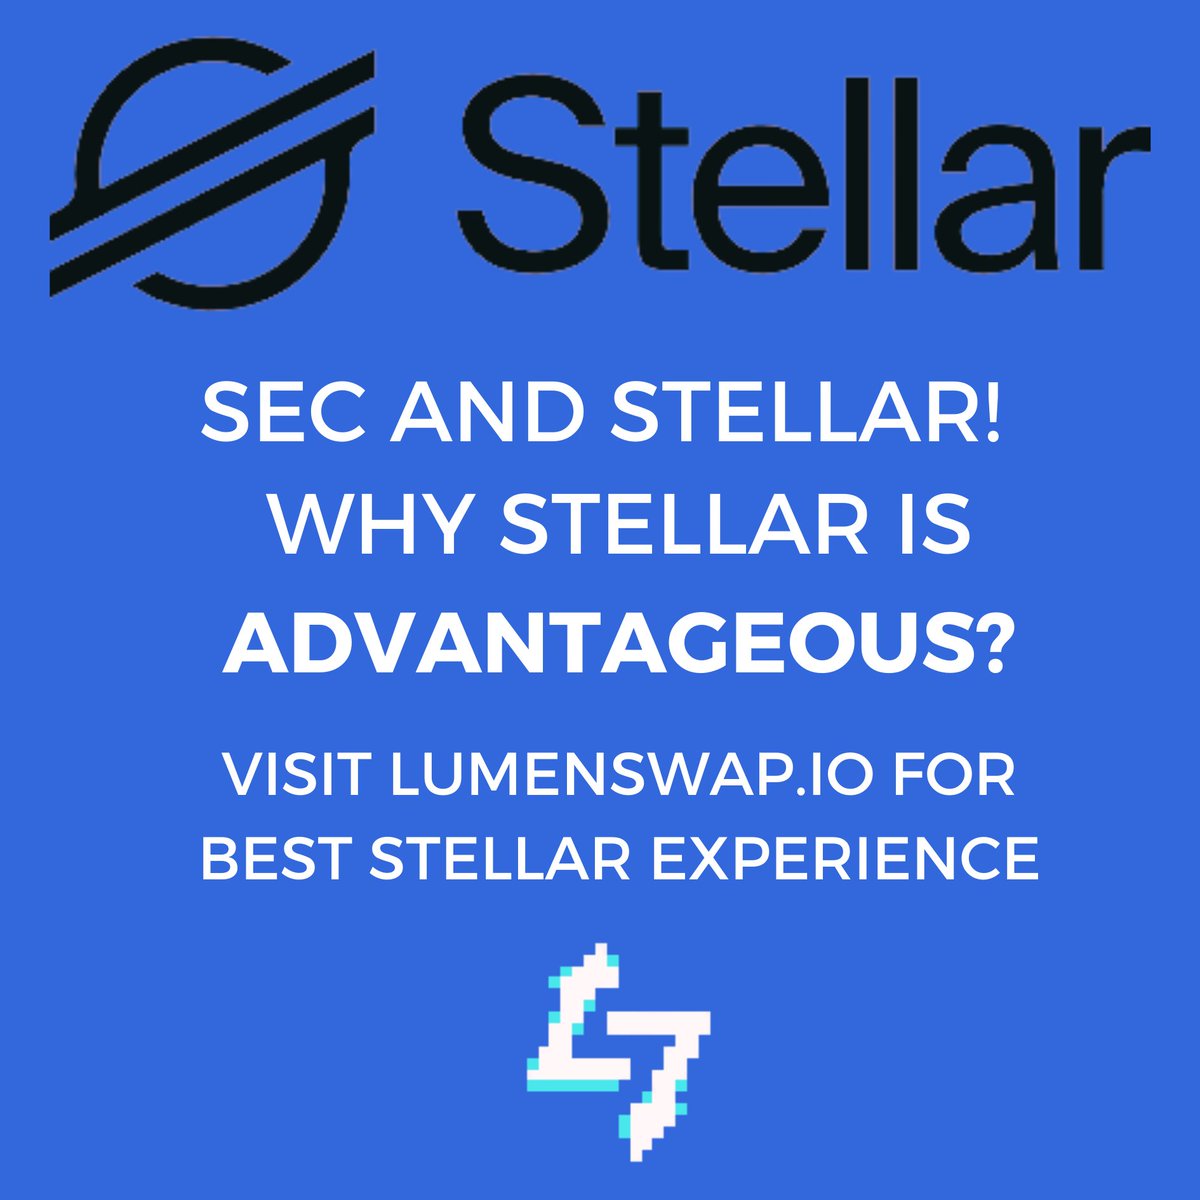 Why #Stellar $XLM is very favorable in #SEC cases? #XLM
 1/ Stellar has some advantages over Ripple that could help it avoid or withstand a potential SEC lawsuit. For one, Stellar is a non-profit foundation that does not profit from the sale or use of XLM. It also has a more…